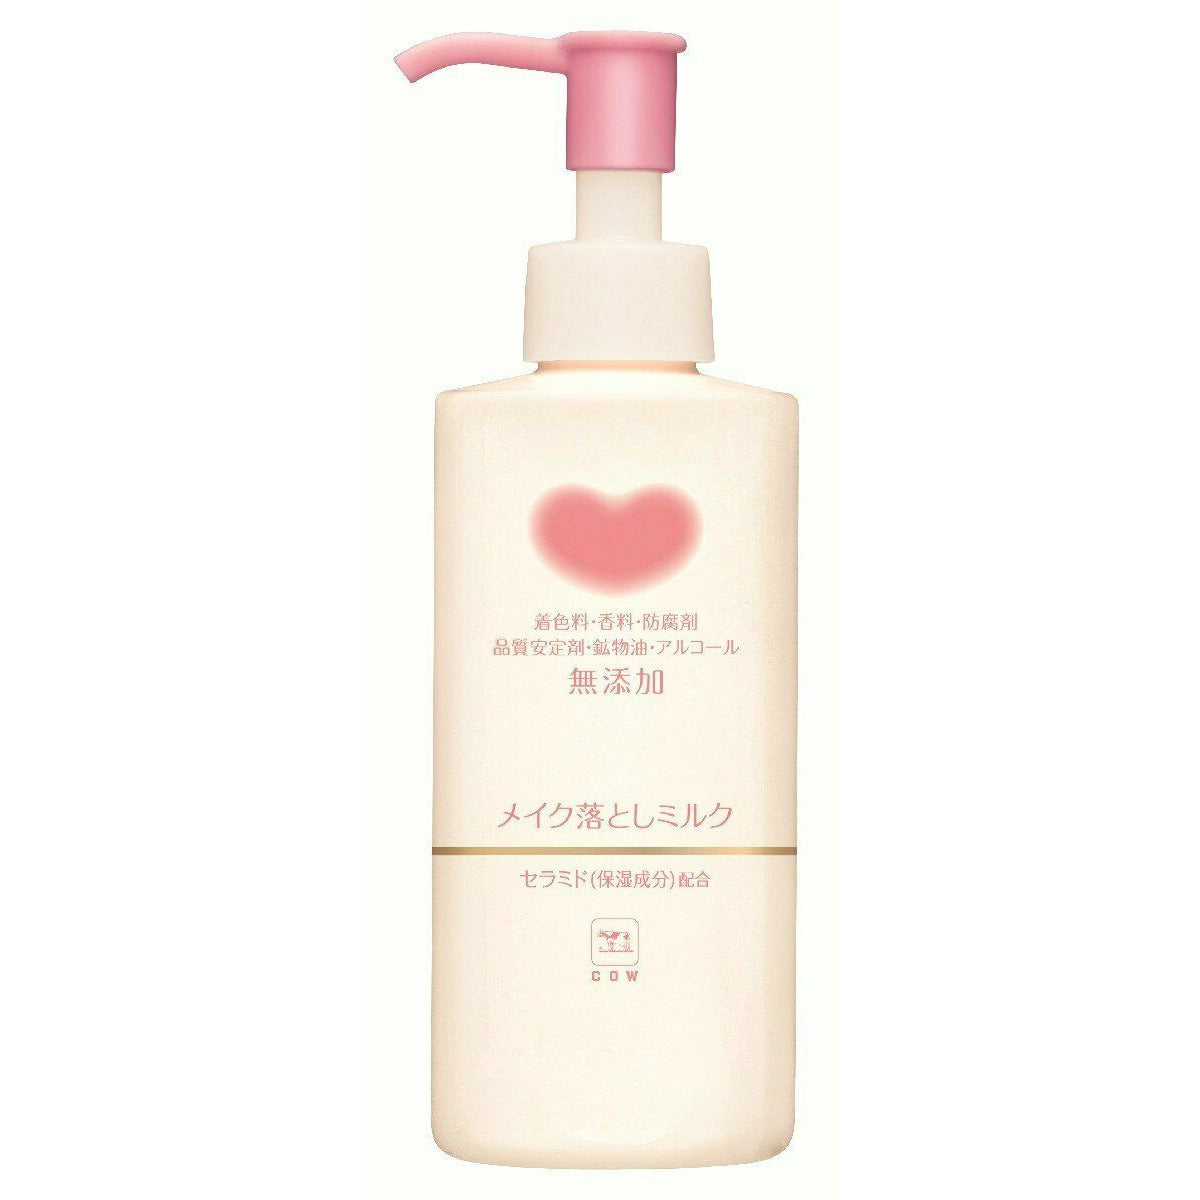 Cow Brand Gyunyu Non Additive Makeup Cleansing Milk 150ml